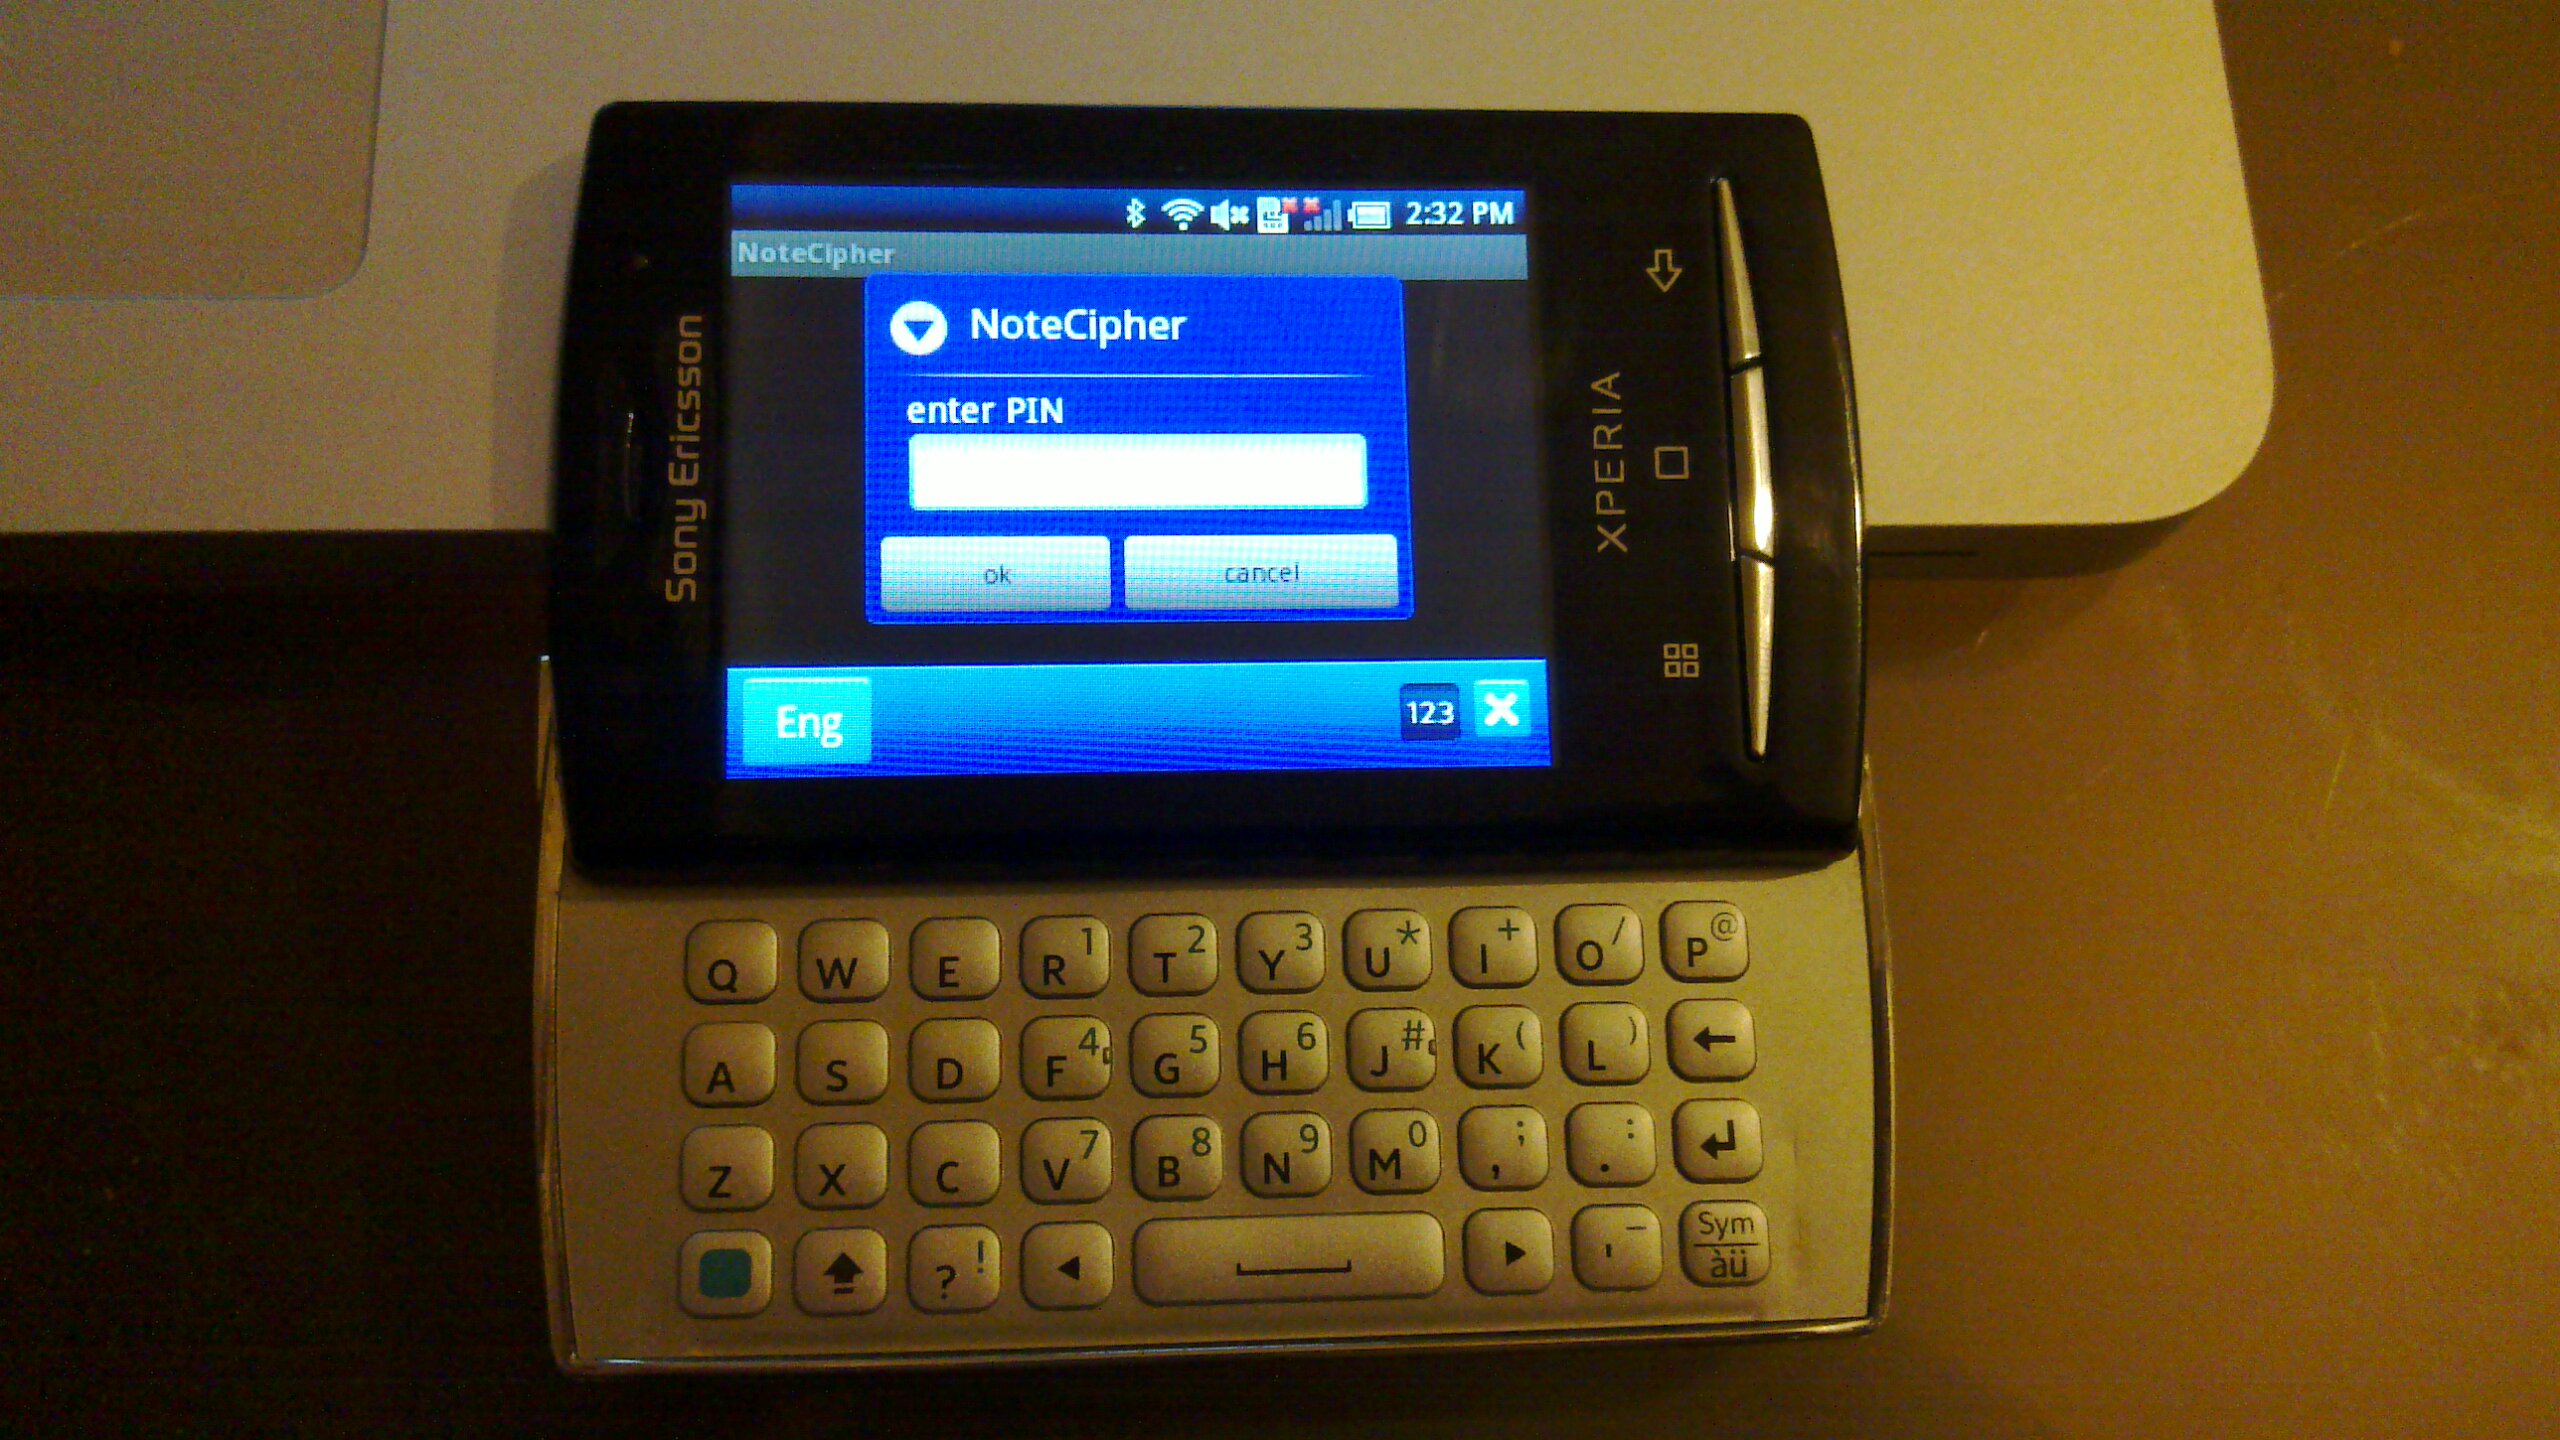 an open flip - style smart phone displaying the internet on its screen